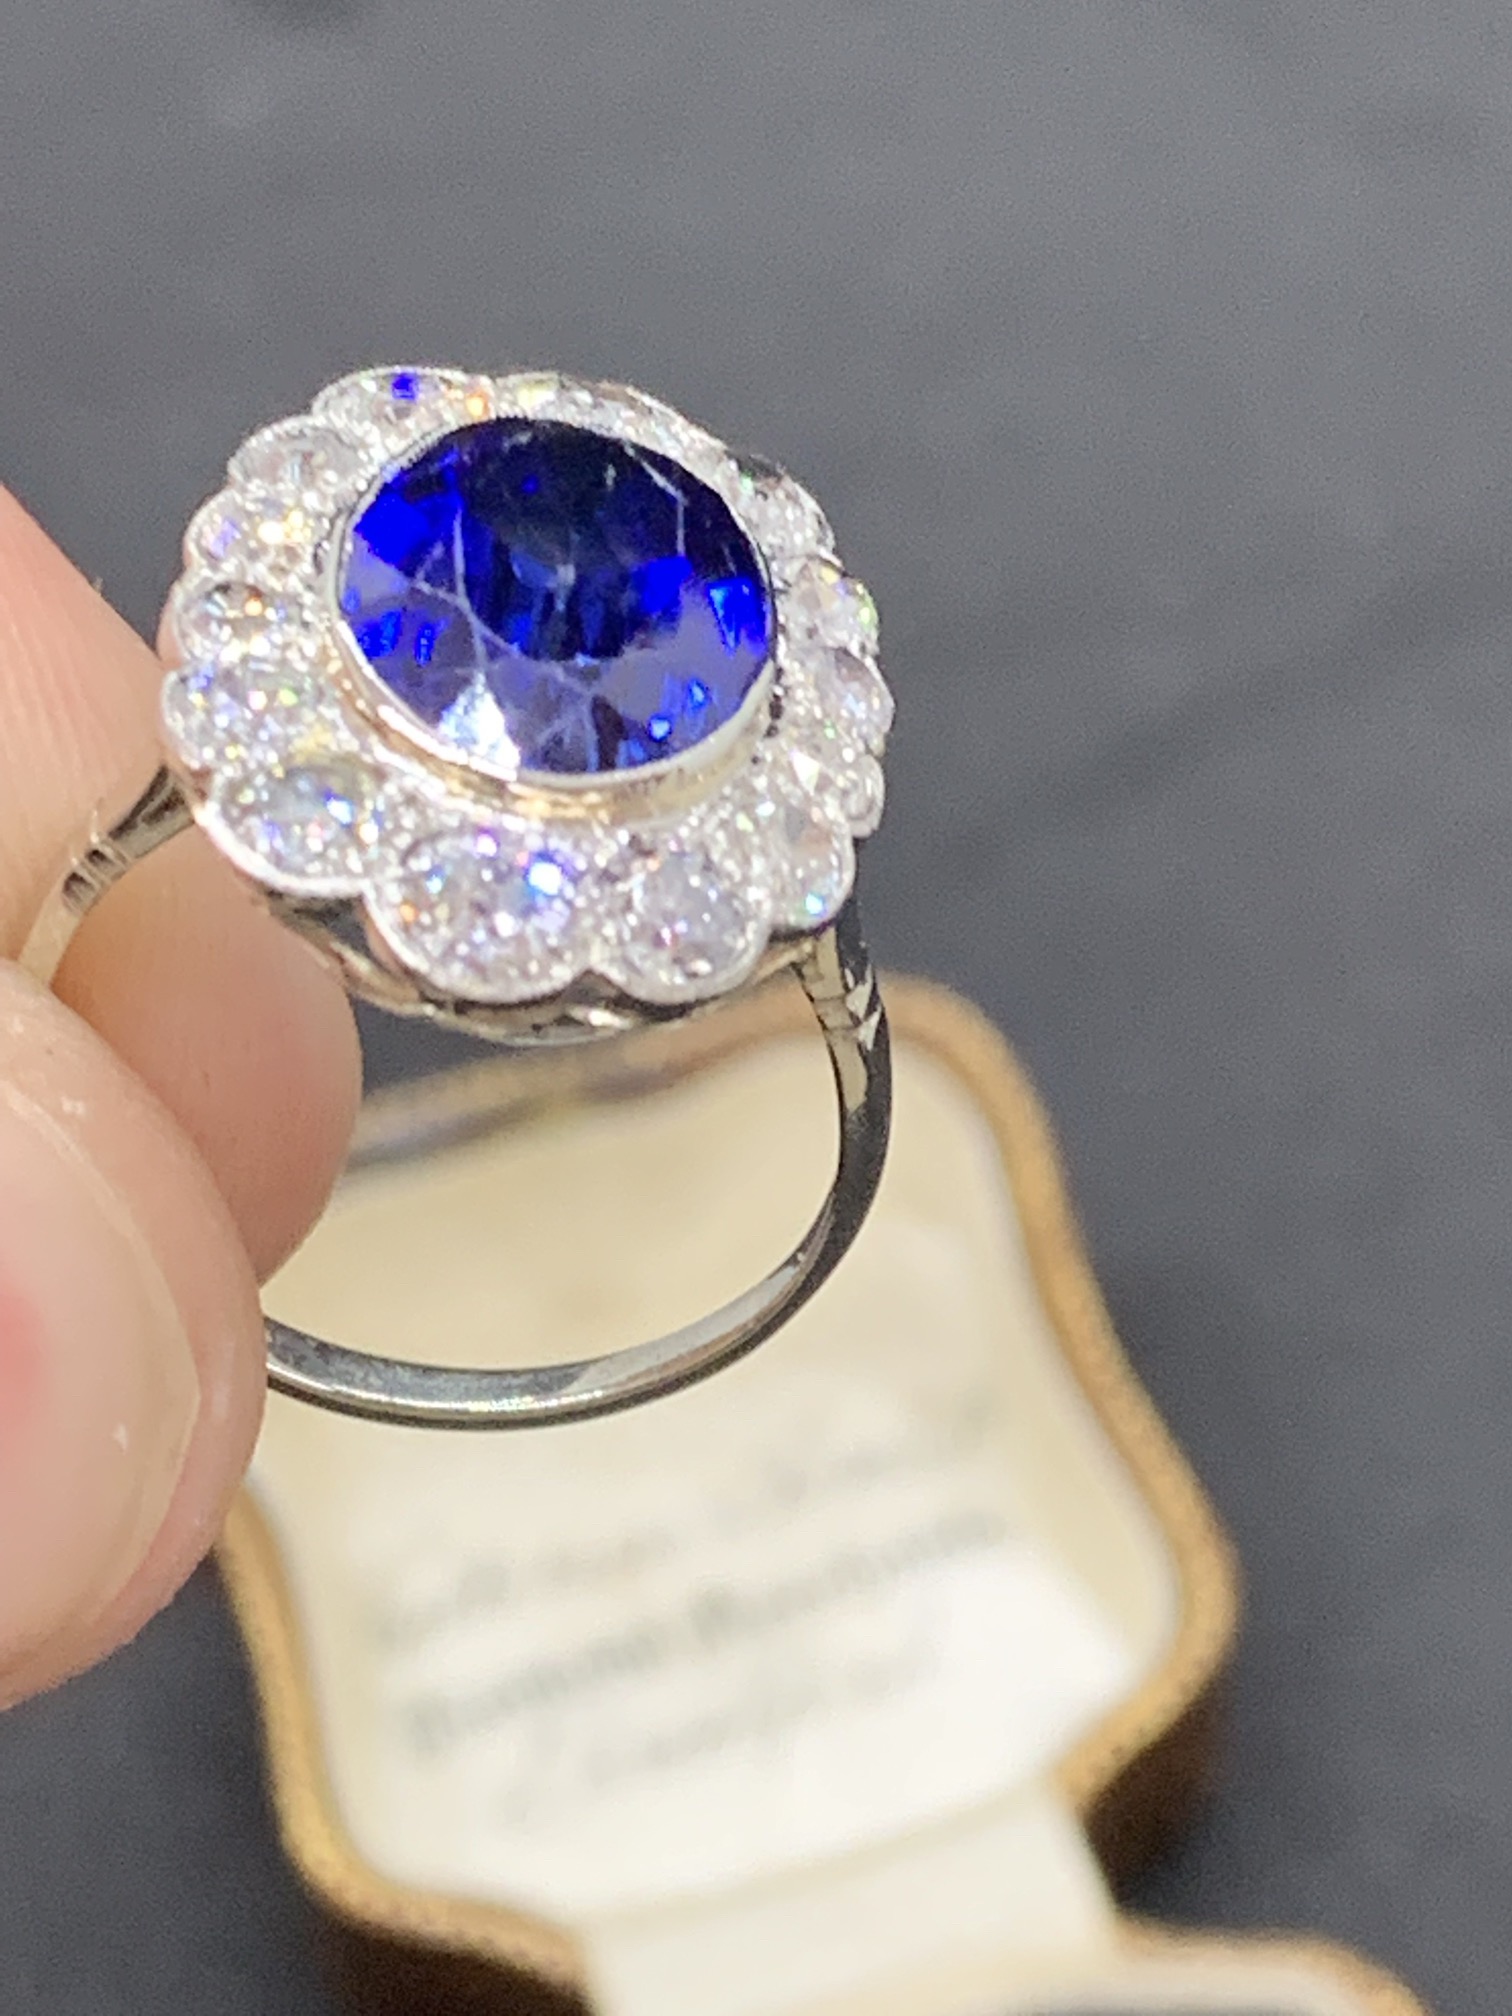 FINE 18ct Gold DIamond & Large Blue Stone Ring - approx 2cts of Diamonds + - Image 7 of 14